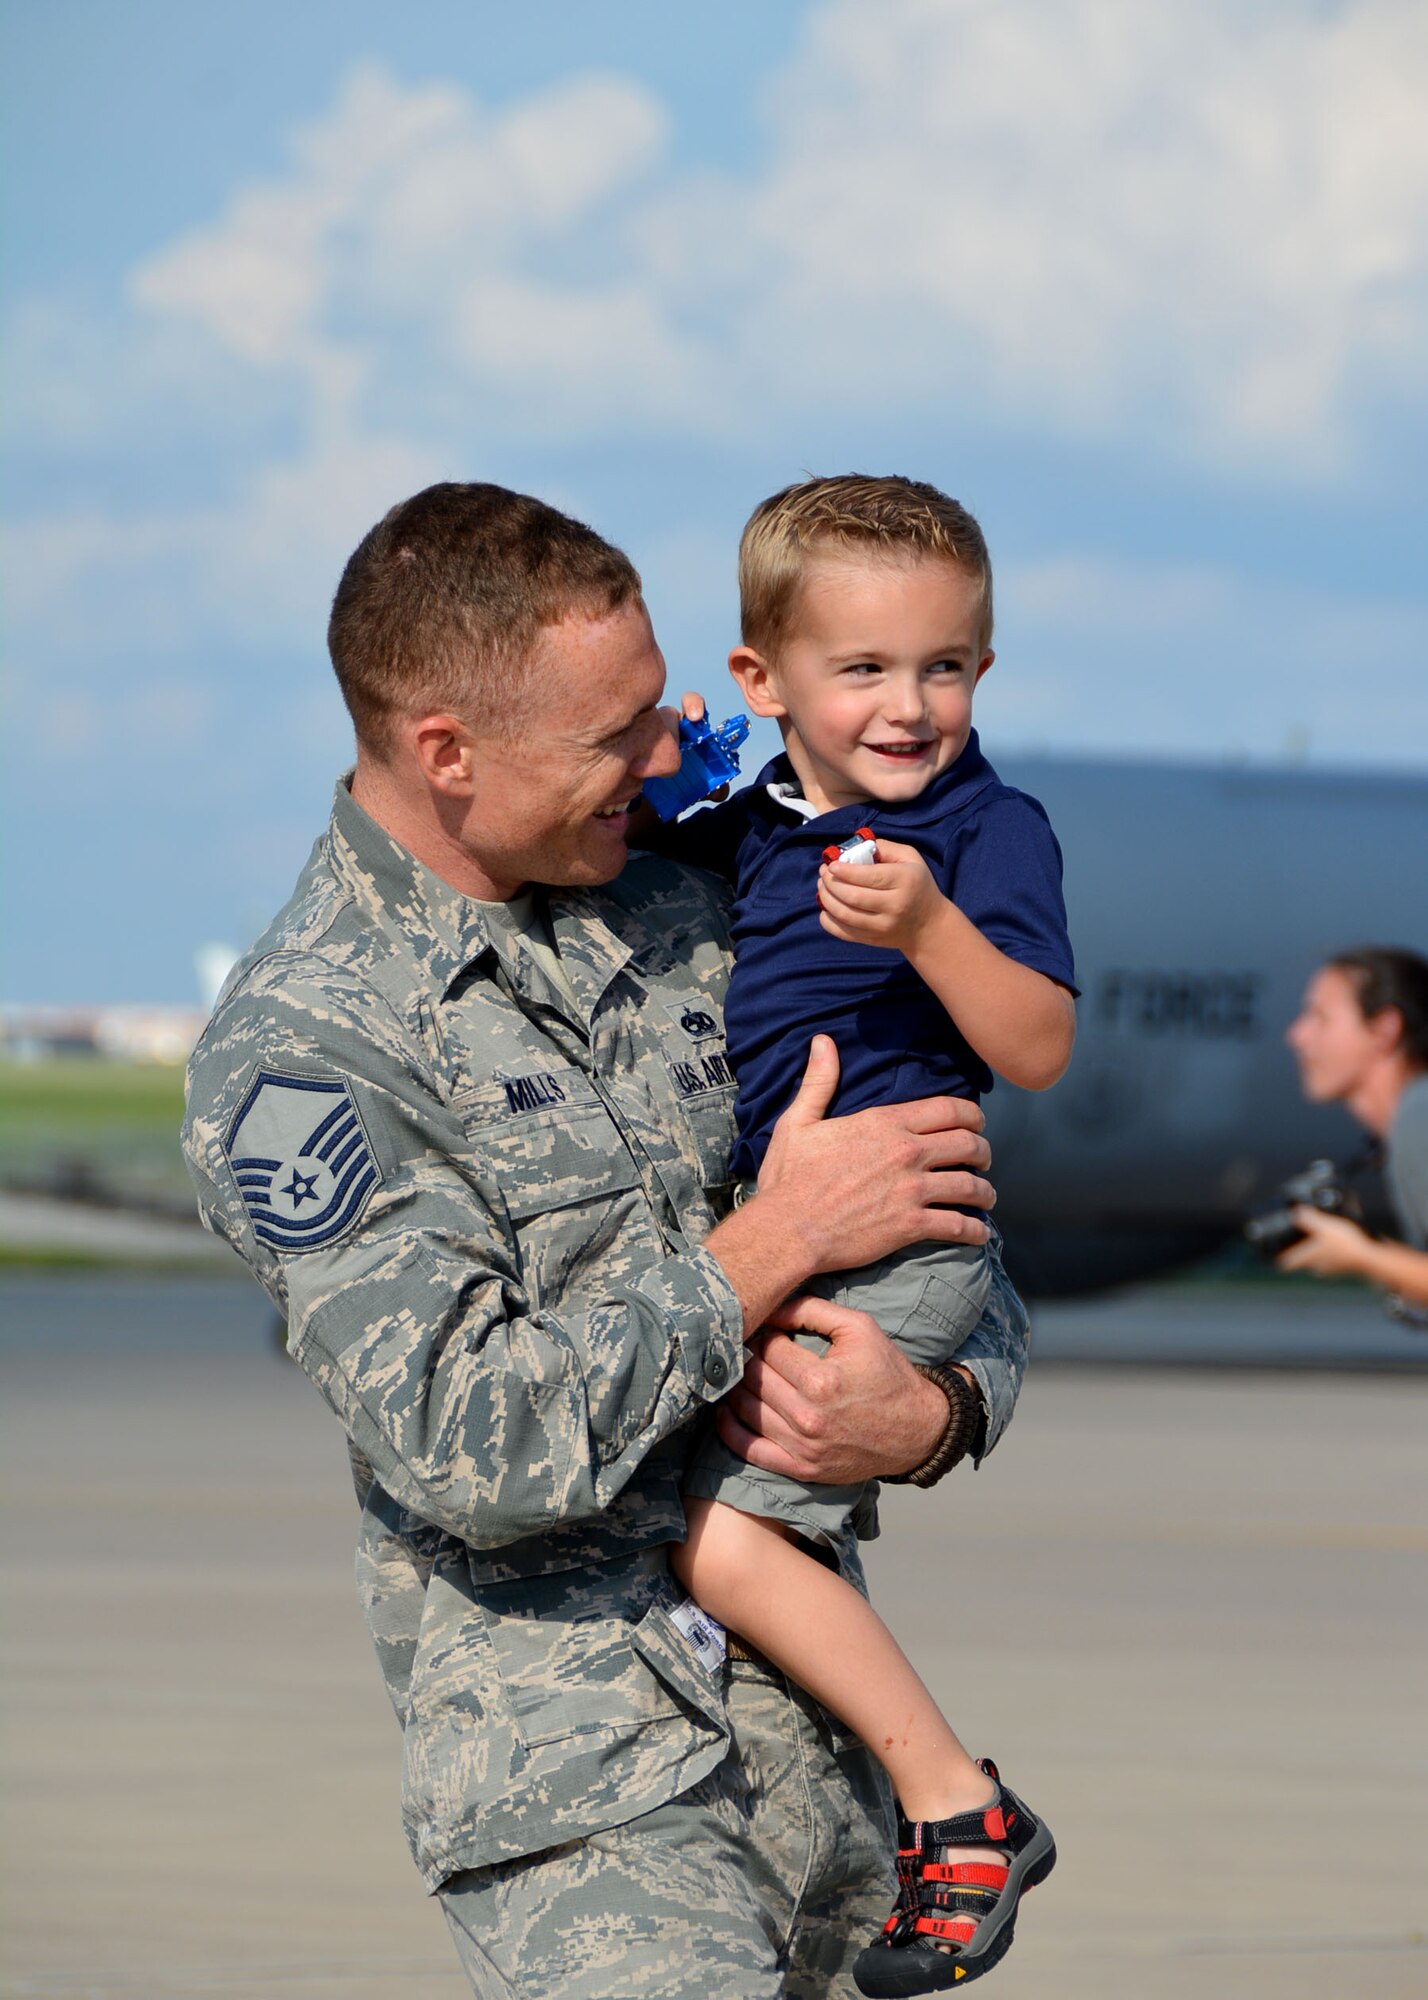 Master Sgt. Robert Mills of the 507th Maintenance Squadron at Tinker Air Force Base, Okla., holds his oldest son moments after returning from a four-month deployment from Southwest Asia June 11, 2016. Moments later, he met his two-month old son for the first time. (U.S. Air Force photo/Tech. Sgt. Lauren Gleason)